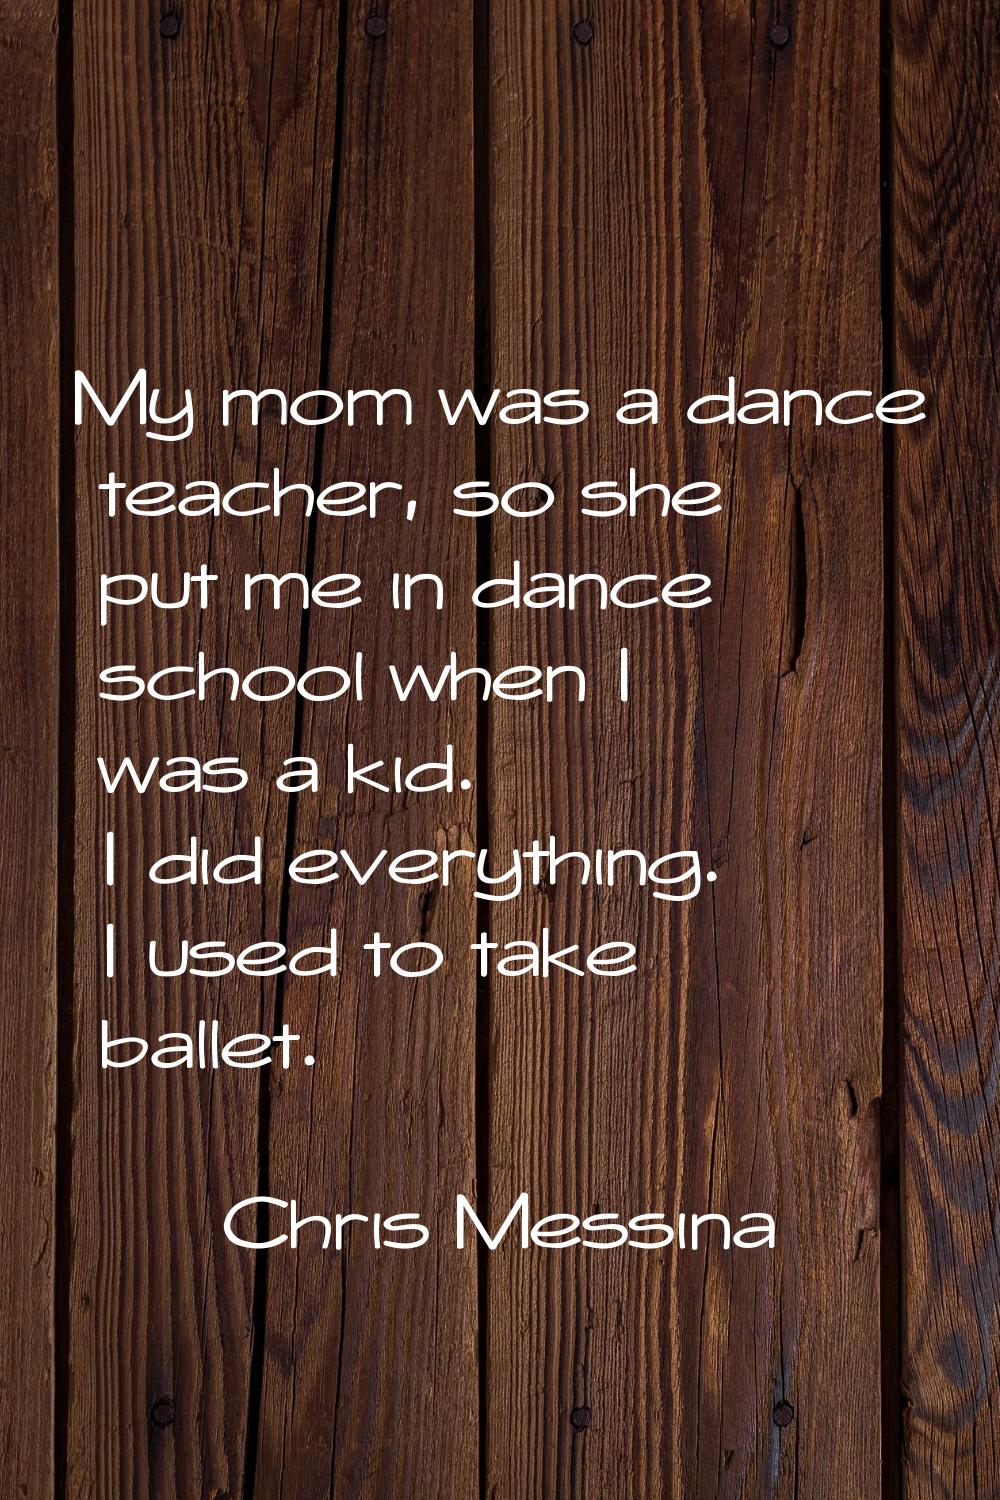 My mom was a dance teacher, so she put me in dance school when I was a kid. I did everything. I use